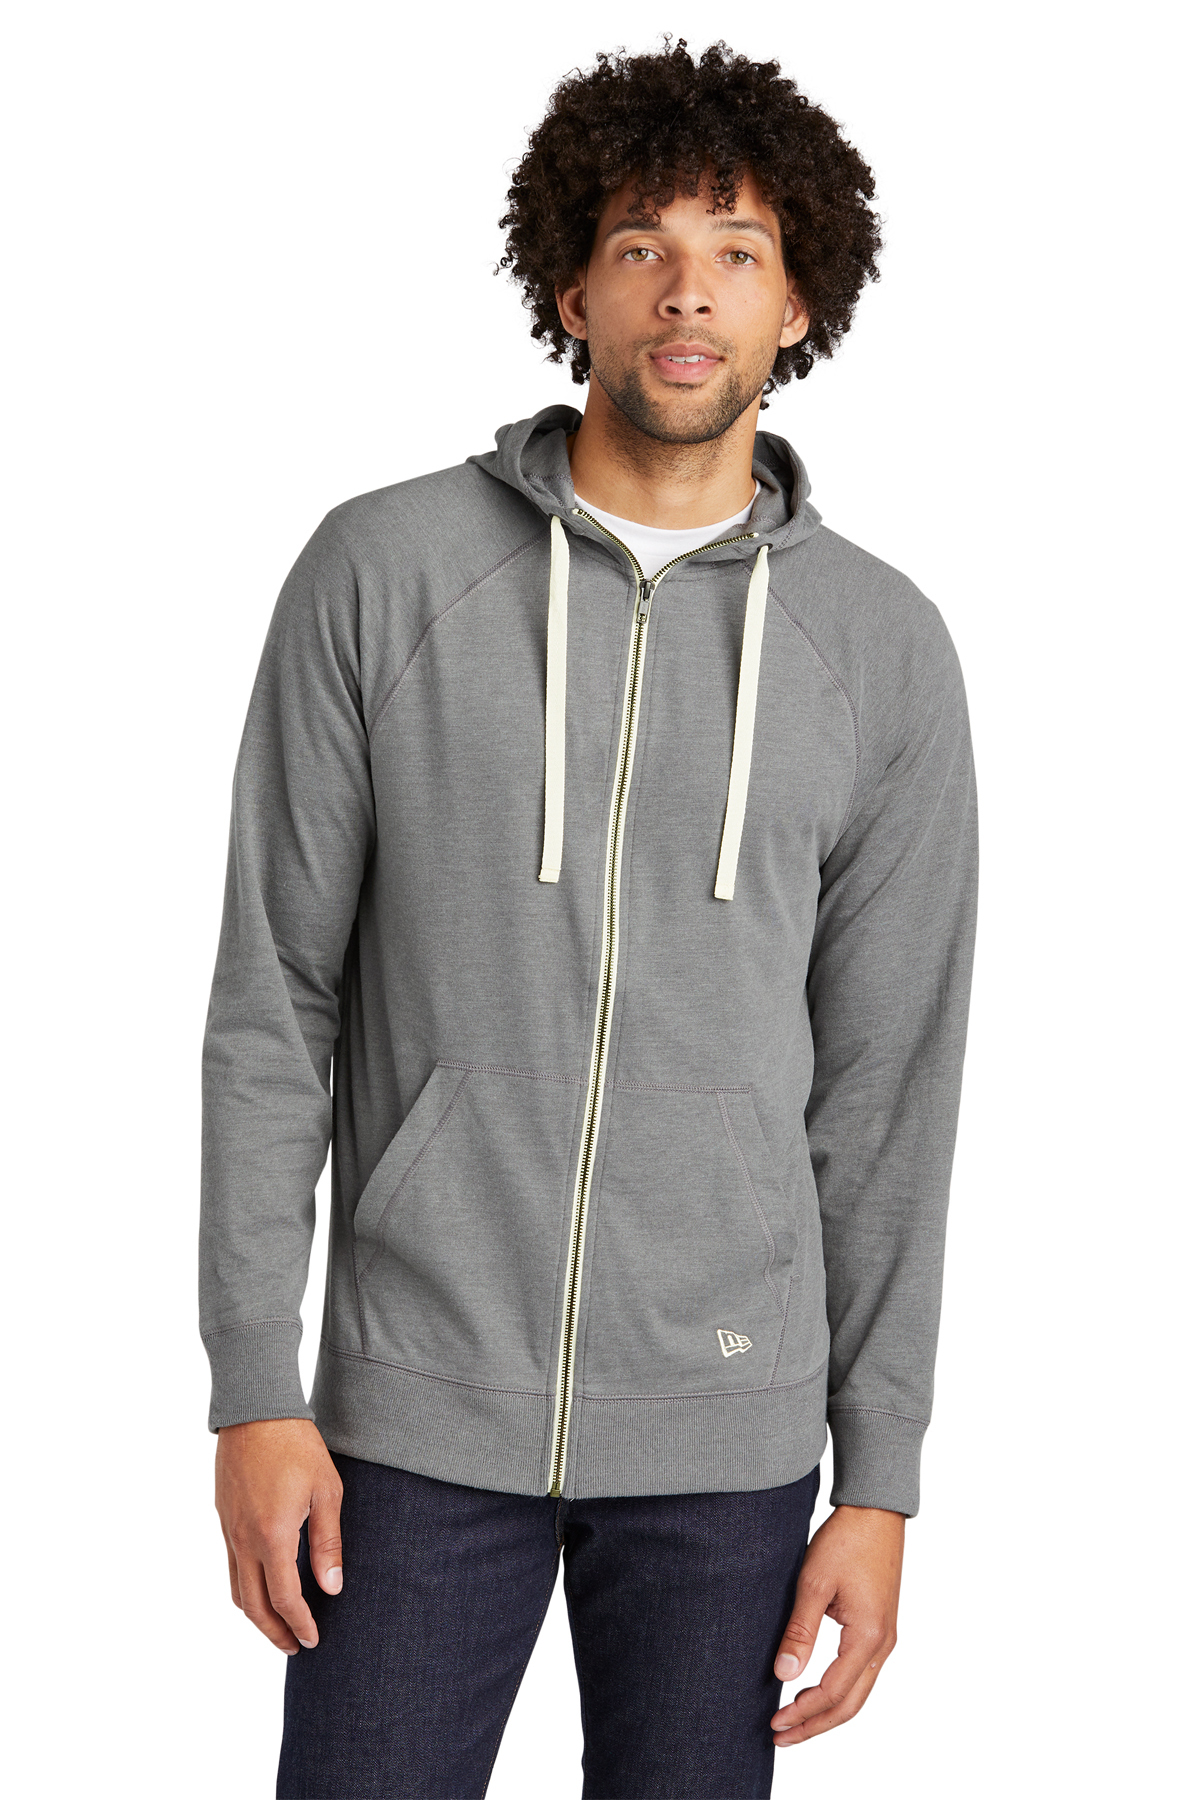 New Era ® Sueded Cotton Blend Full-Zip Hoodie | Product | Company Casuals